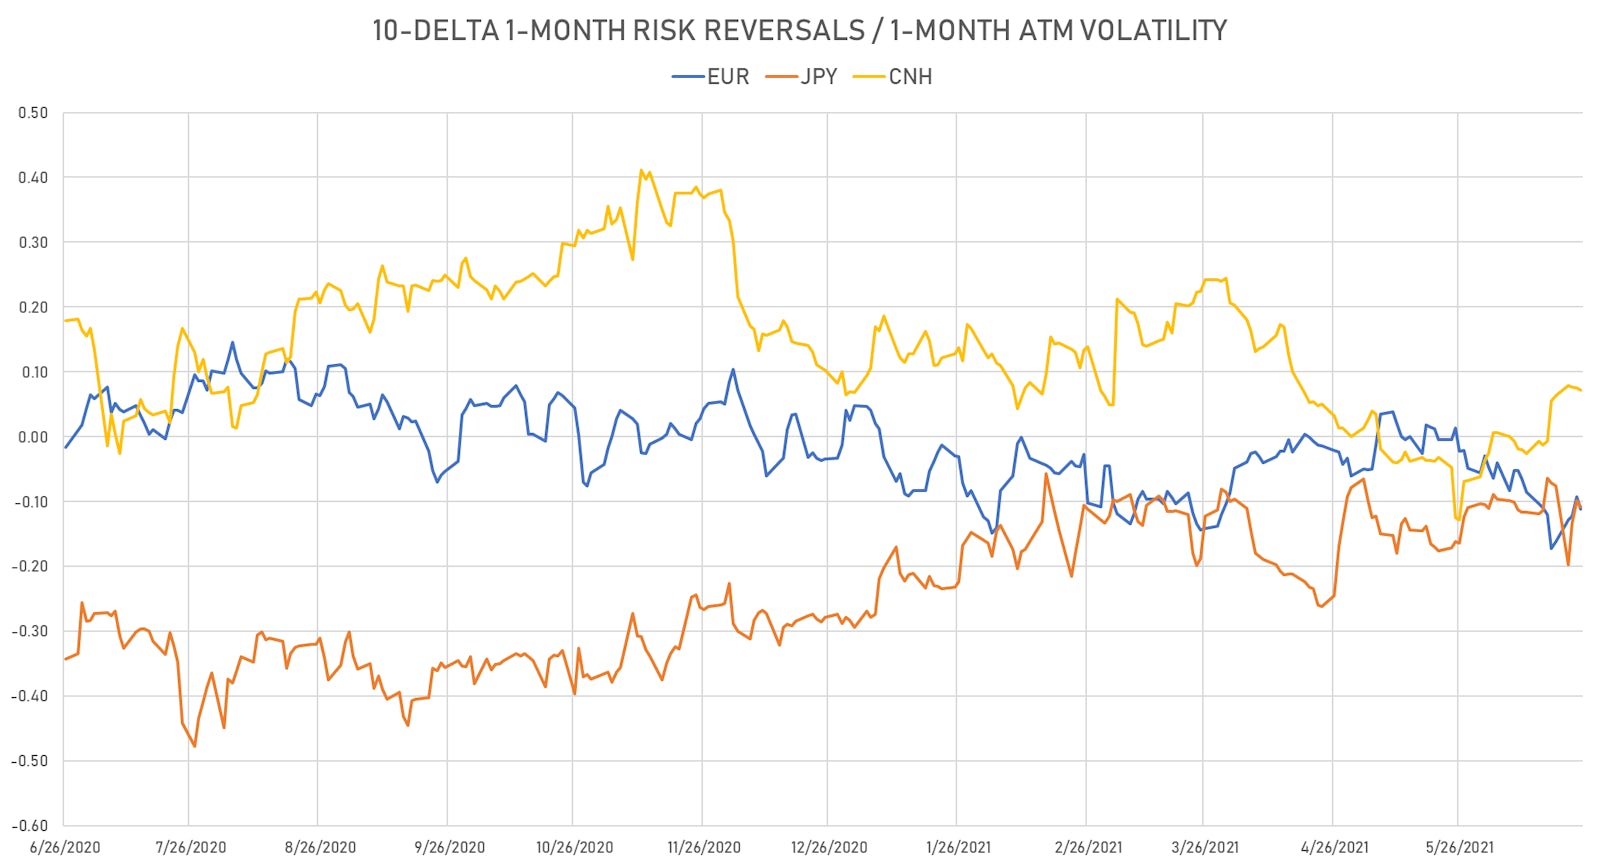 No strong sense of direction in risk reversals at the moment | Sources: ϕpost, Refinitiv data